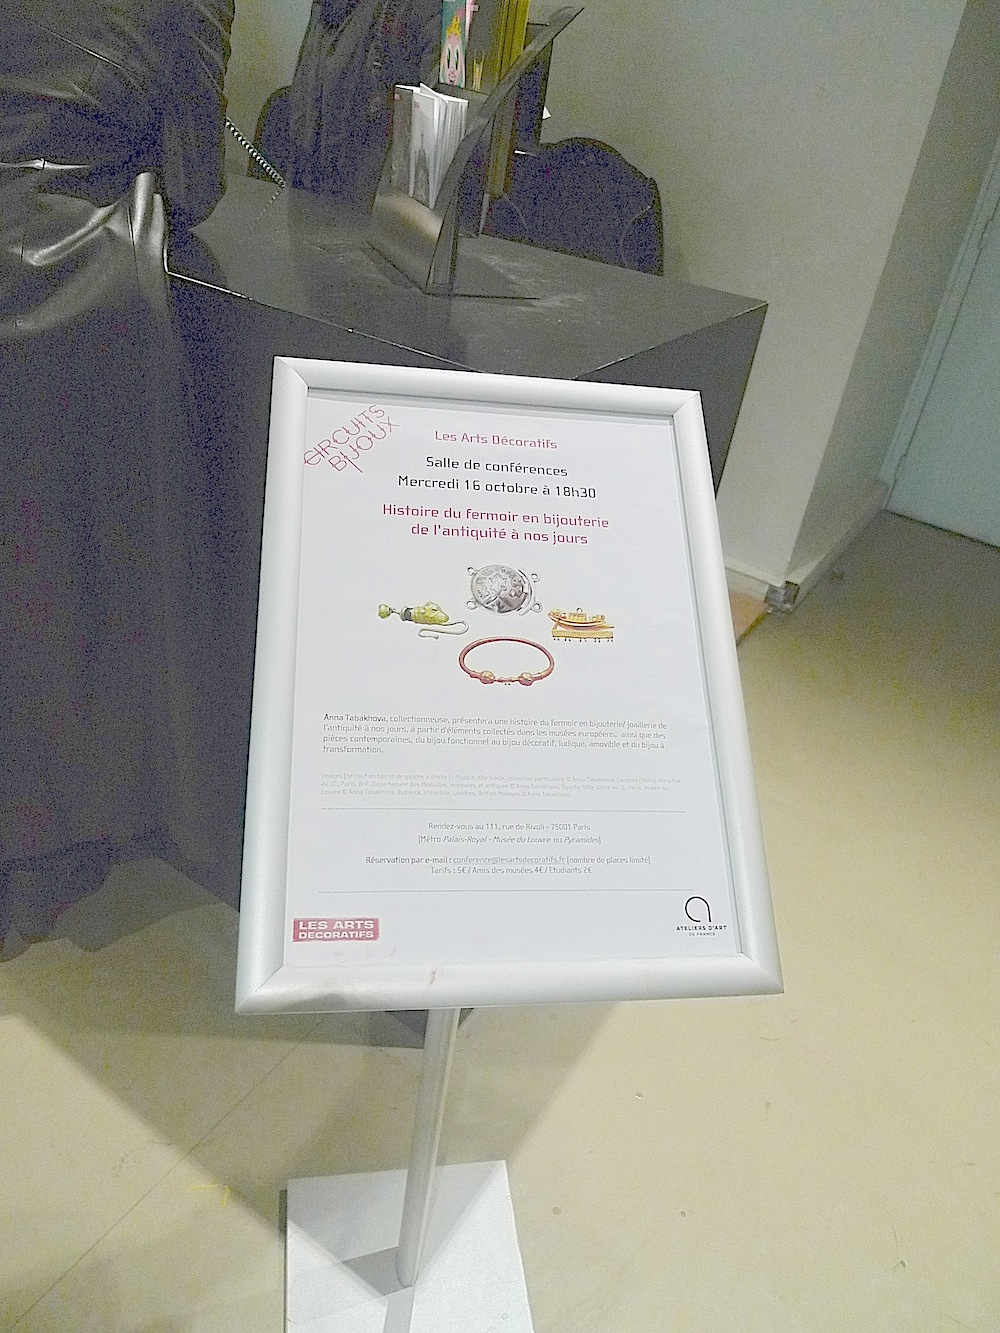 poster at Museum entrance, conference lecture , history of clasps by anna tabakhova, Paris